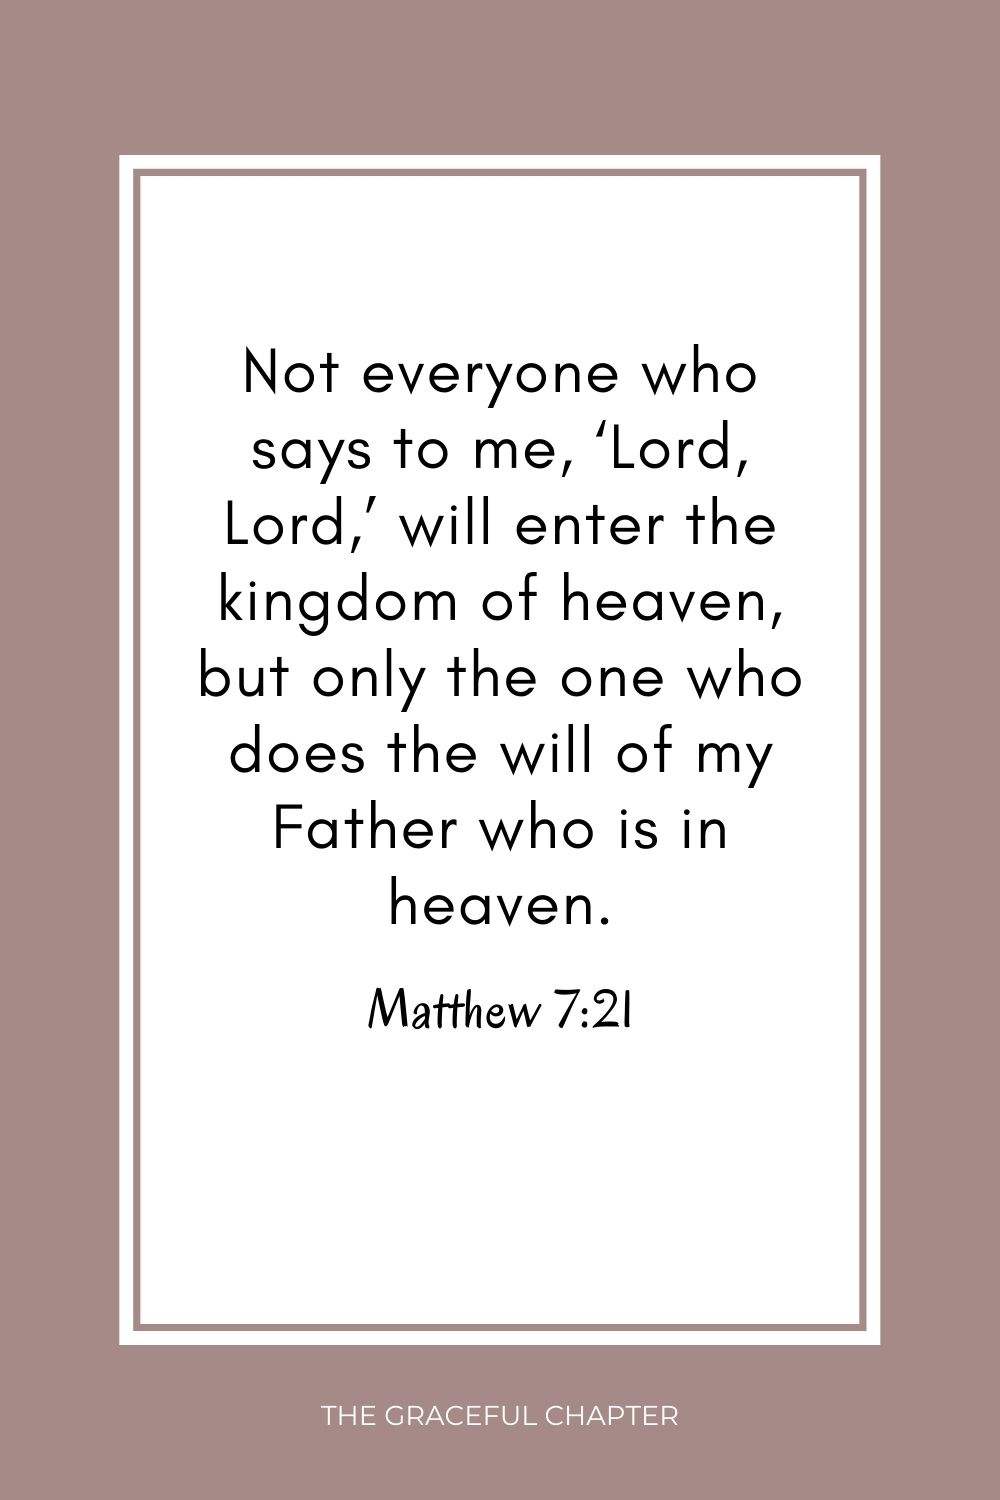 Not everyone who says to me, ‘Lord, Lord,’ will enter the kingdom of heaven, but only the one who does the will of my Father who is in heaven. Matthew 7:21